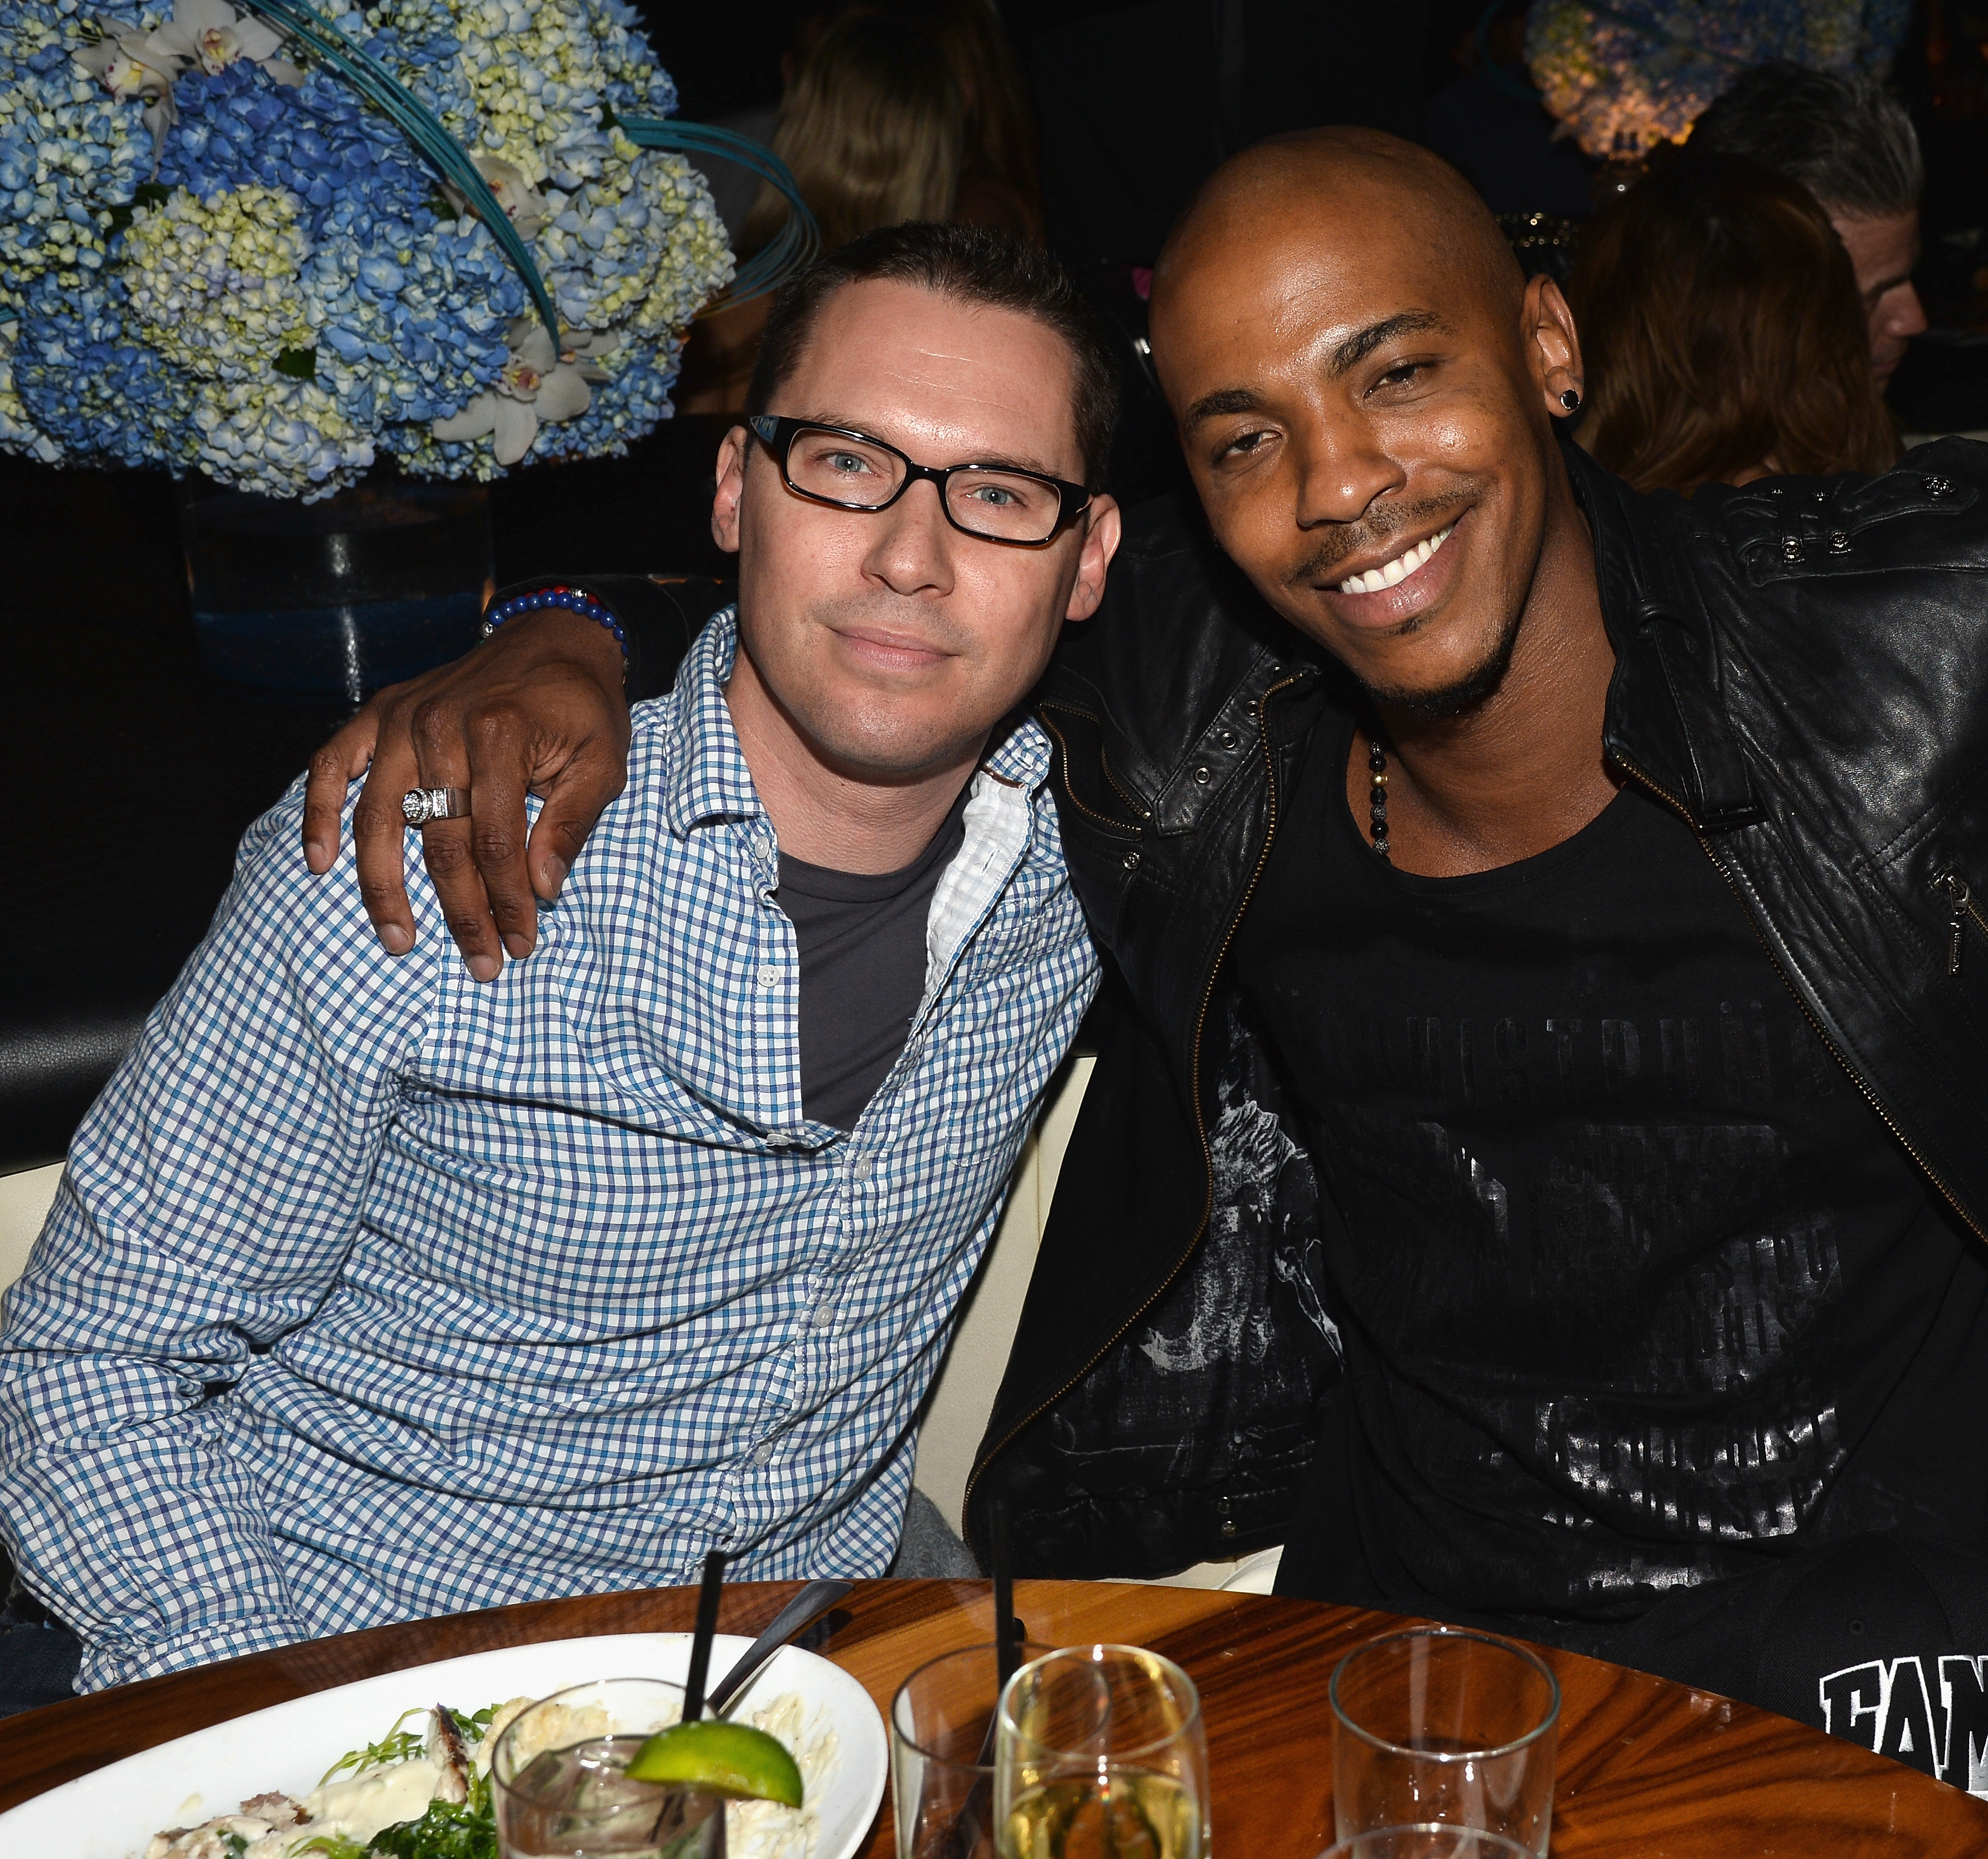 Director Bryan Singer & actor Mehcad Brooks - STK Los Angeles Celebrates Their 6 Year Anniversary Party